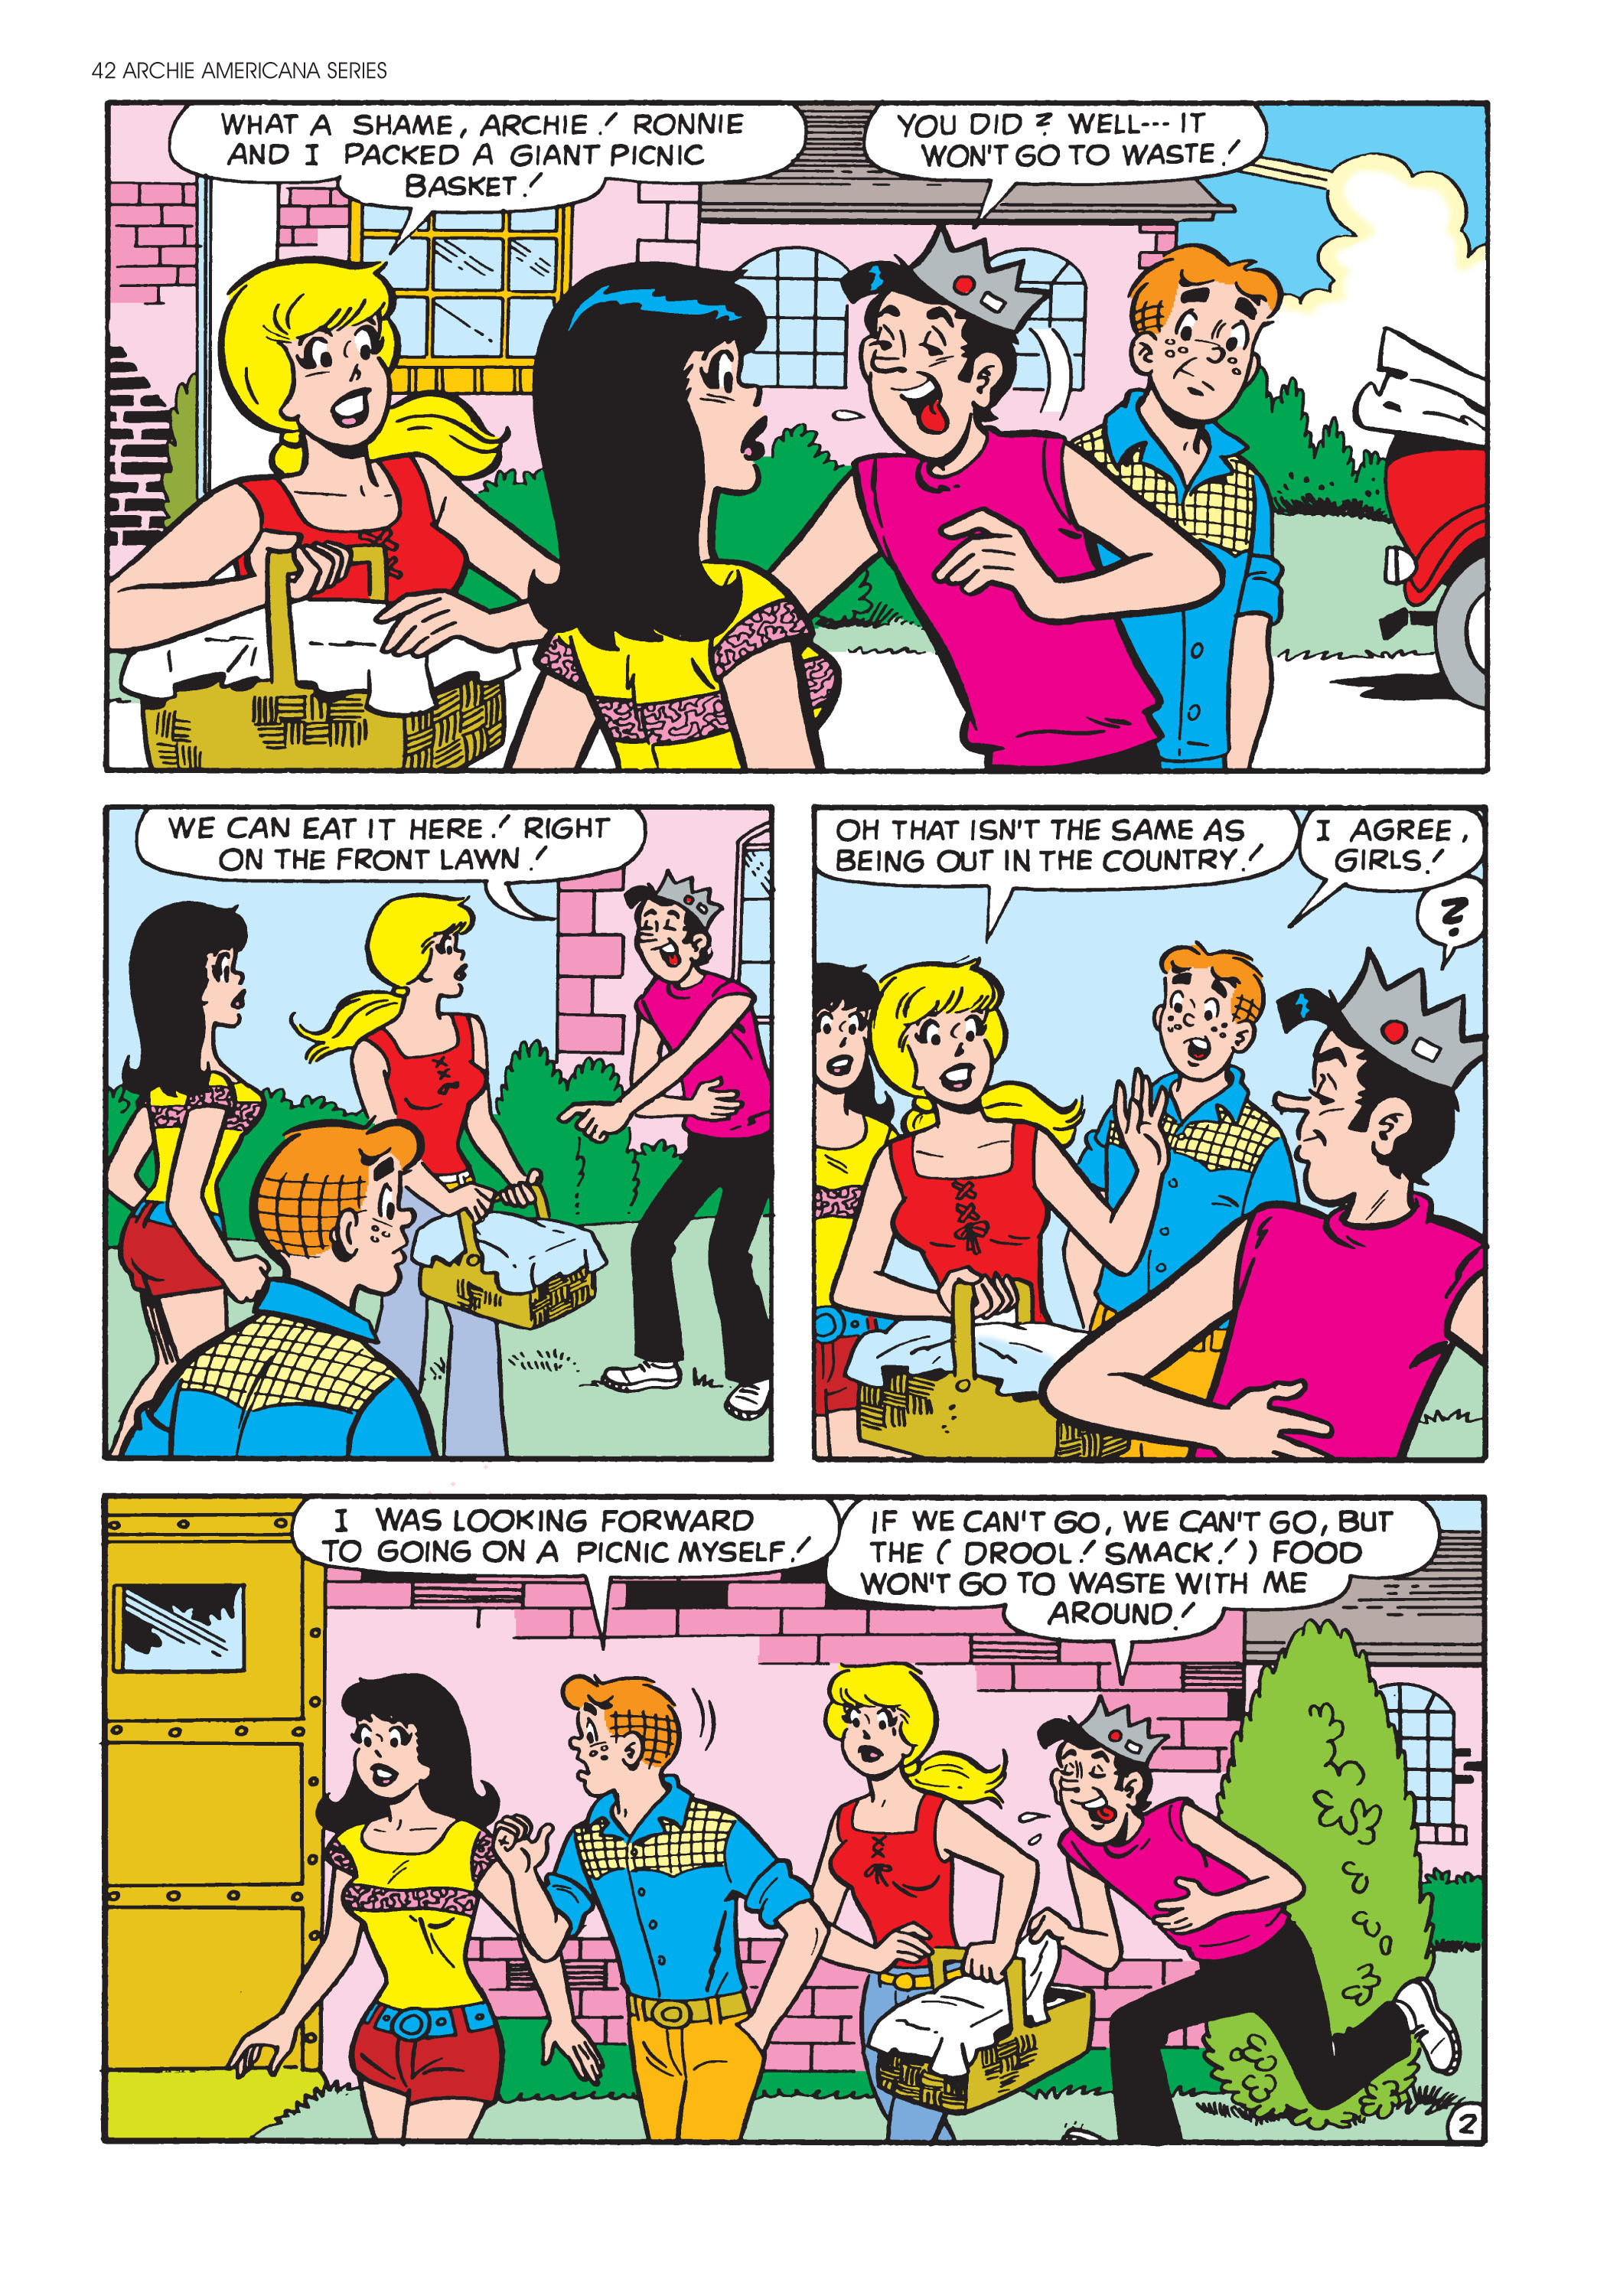 Read online Archie Americana Series comic -  Issue # TPB 4 - 44